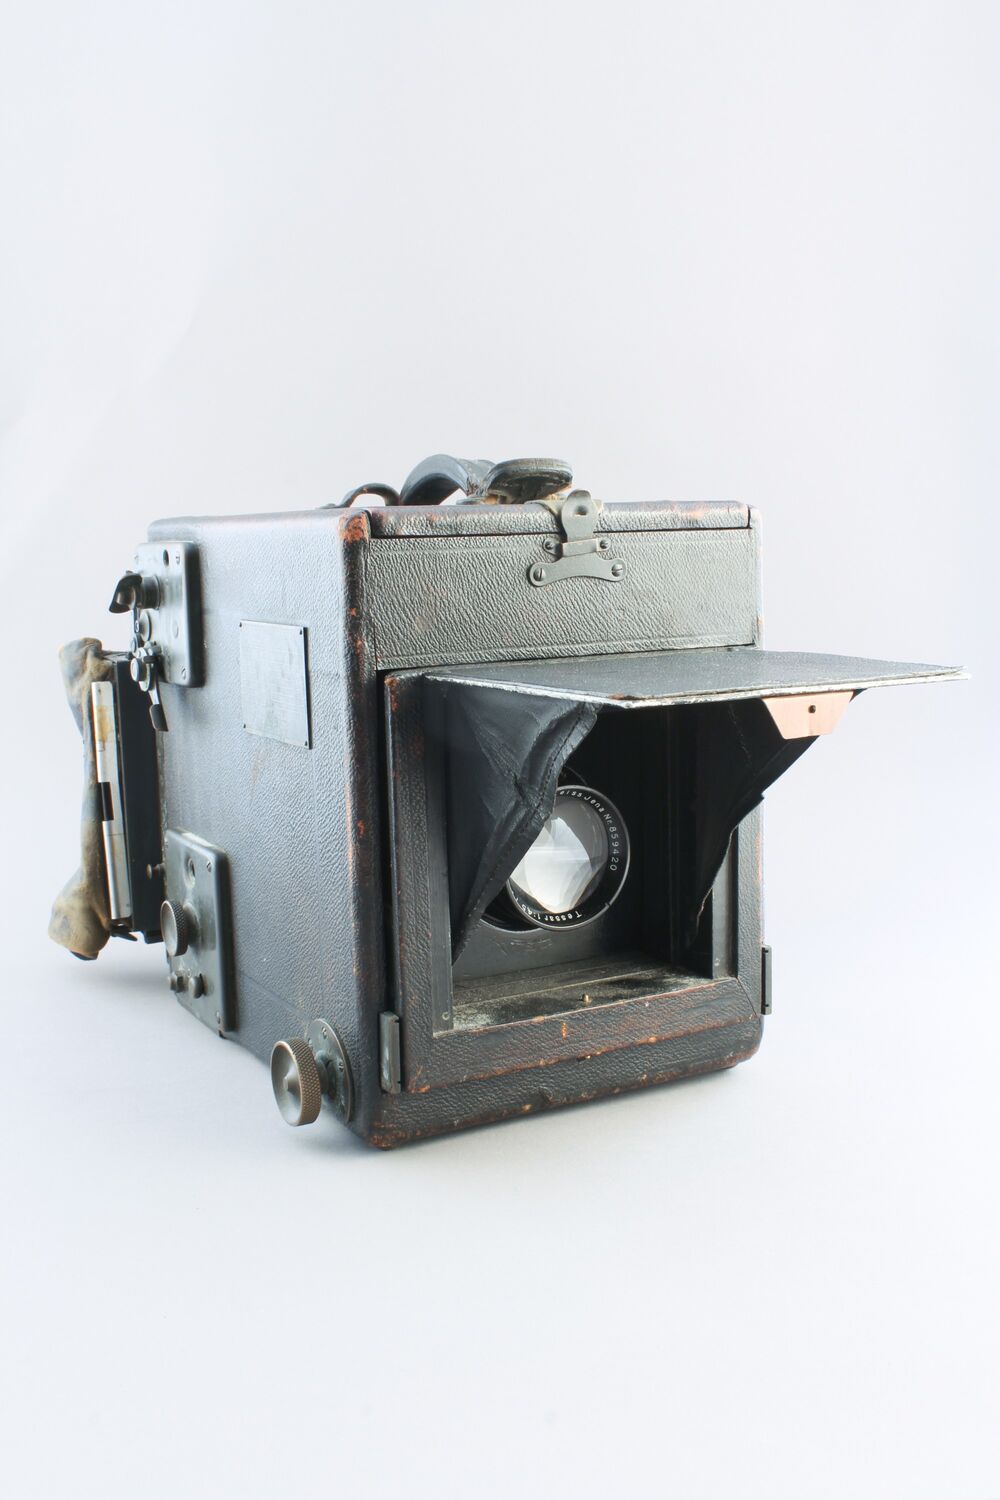 A black, box-shaped camera made from leather and metal, with a flap folded up to reveal the lens.